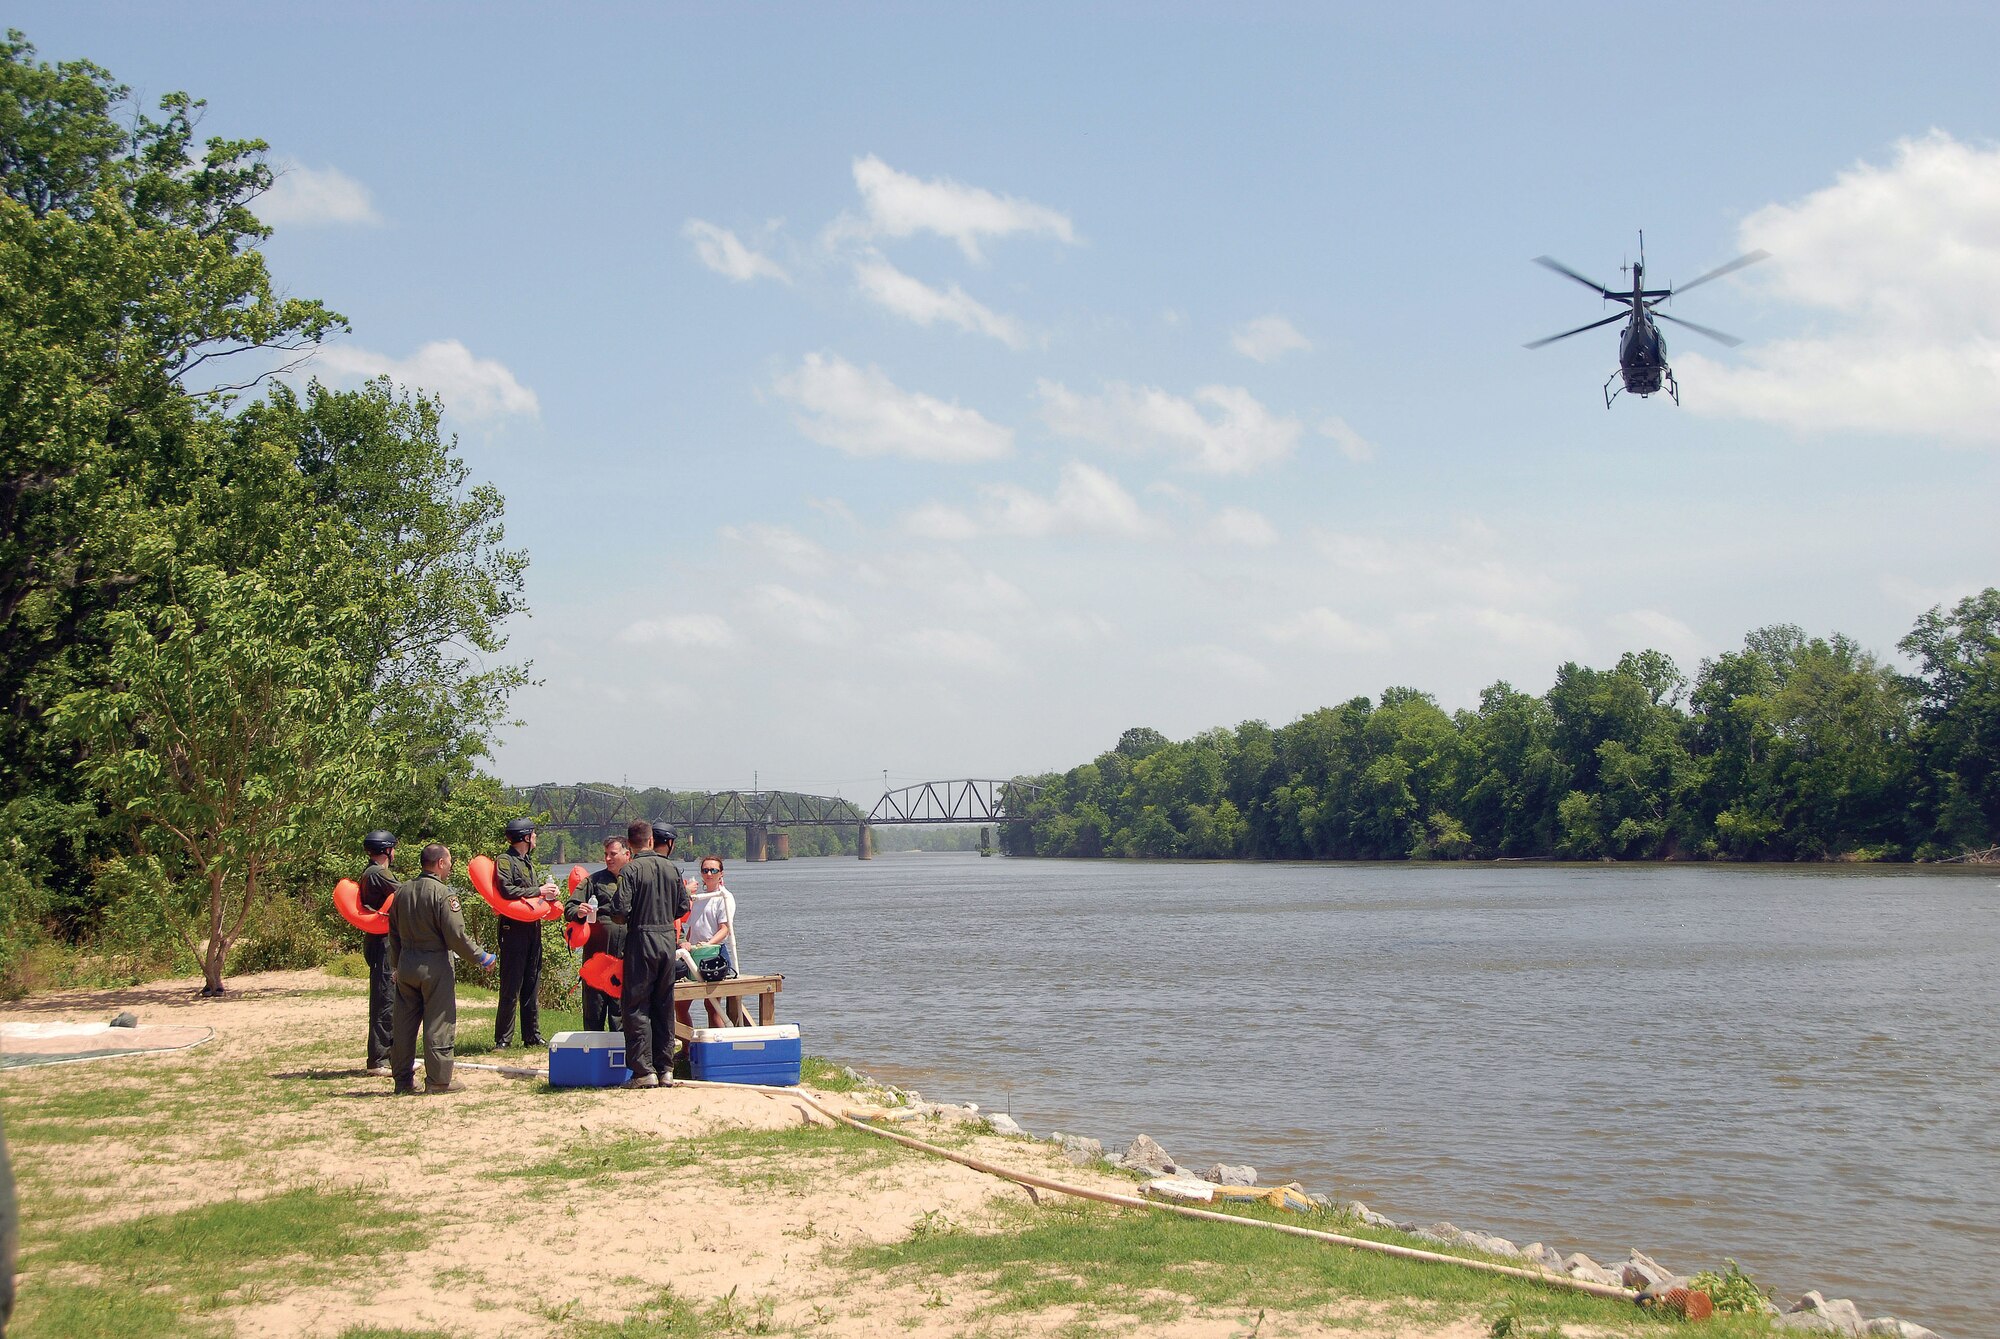 Member of the 908th Airlift Wing gather at the banks of the Alabama River in Millbrook, Ala. in preparation for mandatory water-survival training. A helicopter from the Alabama Department of Public Safety, which also took part in the training, flies overhead.  (Air Force photo by Gene H. Hughes)